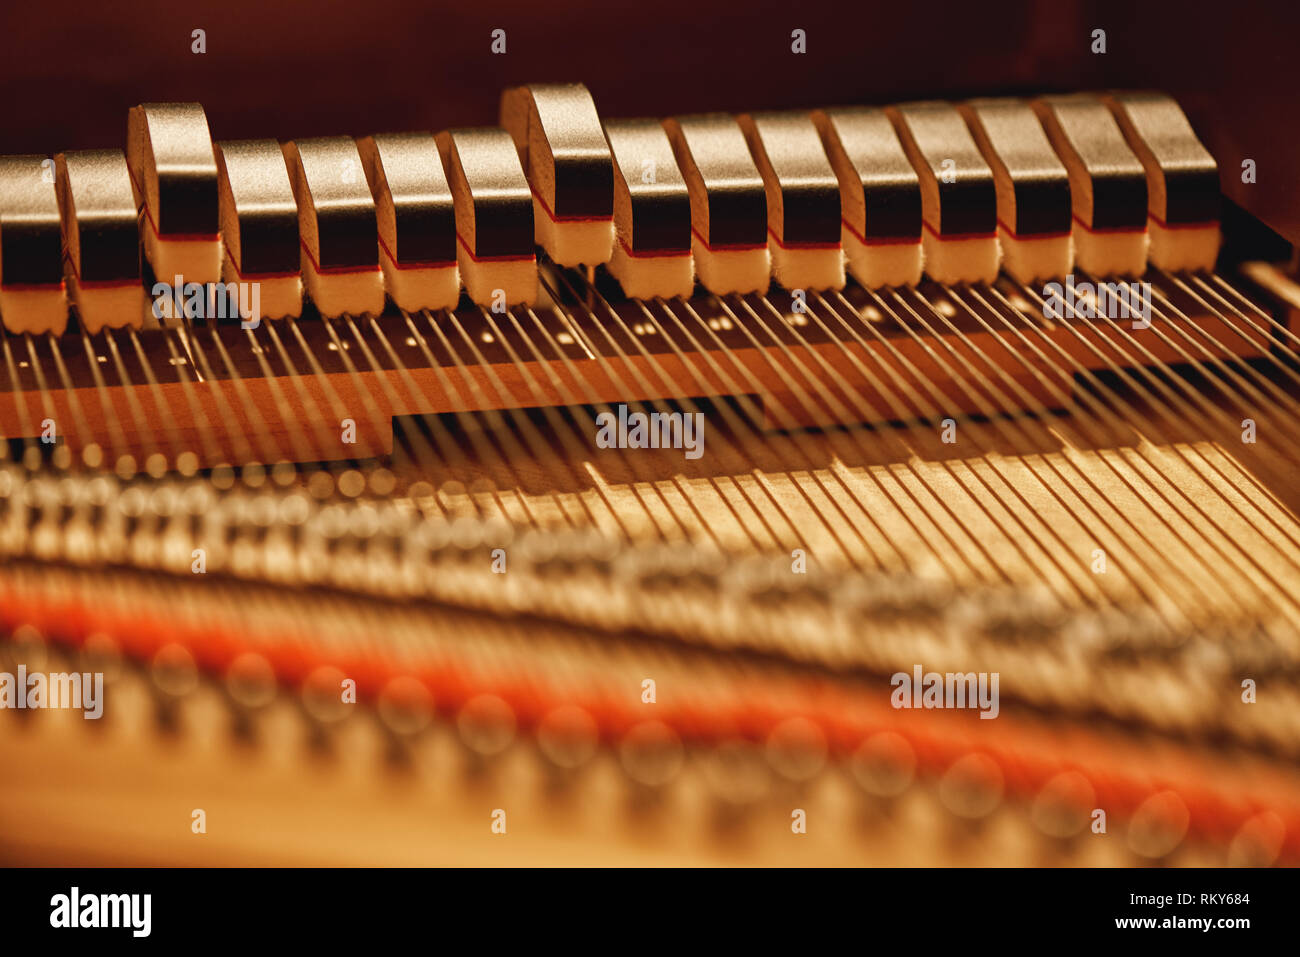 Inside of a piano. Close-up view of hammers and strings inside the piano.  Musical instruments. Piano tuning Stock Photo - Alamy